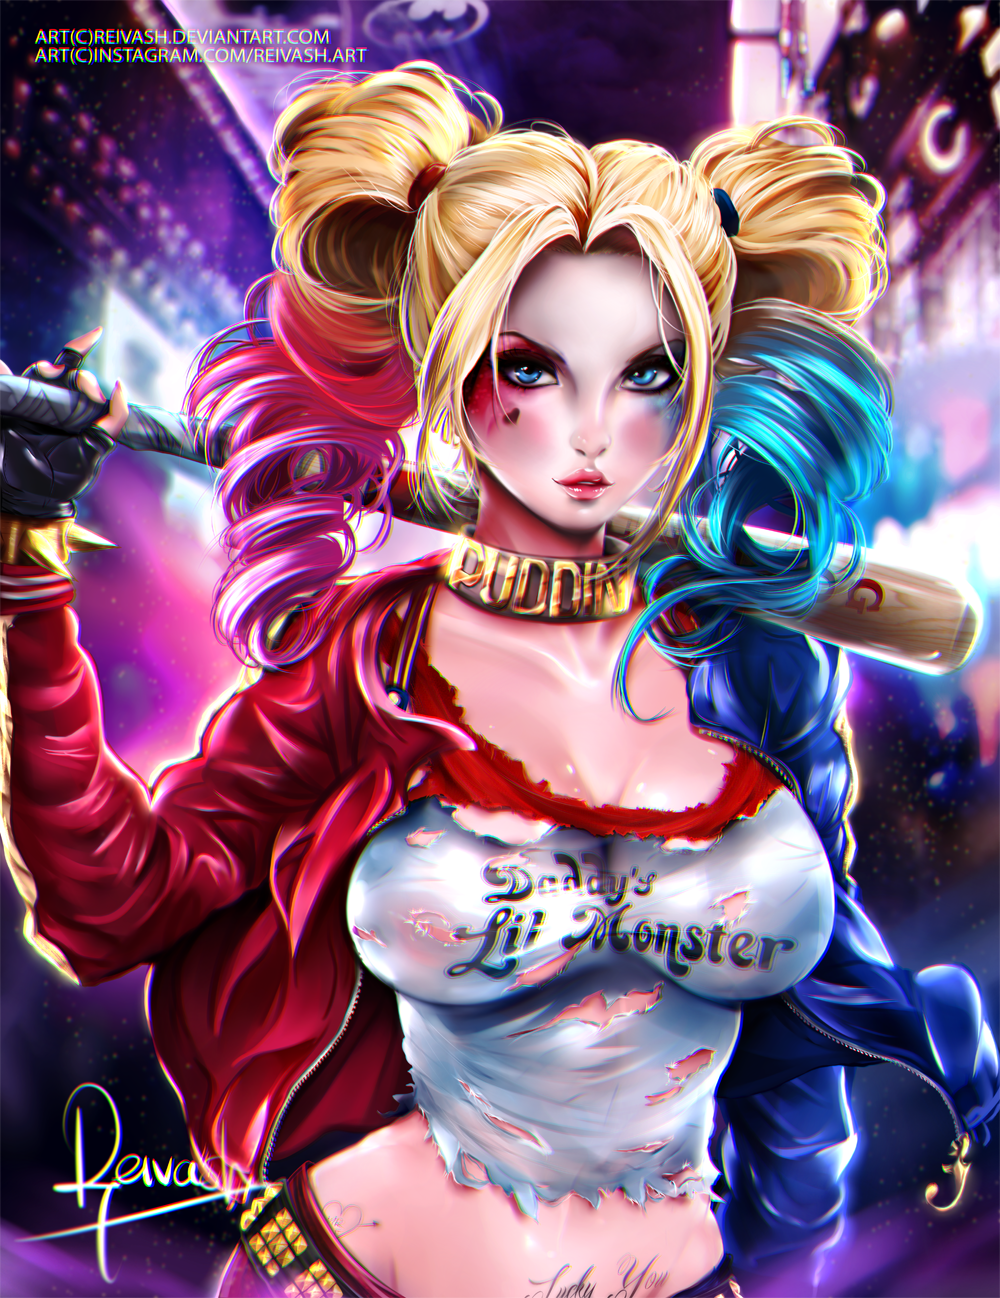 Reivash - Harley Quinn, Girls From Overwatch and Adventure Time in Erotic Art